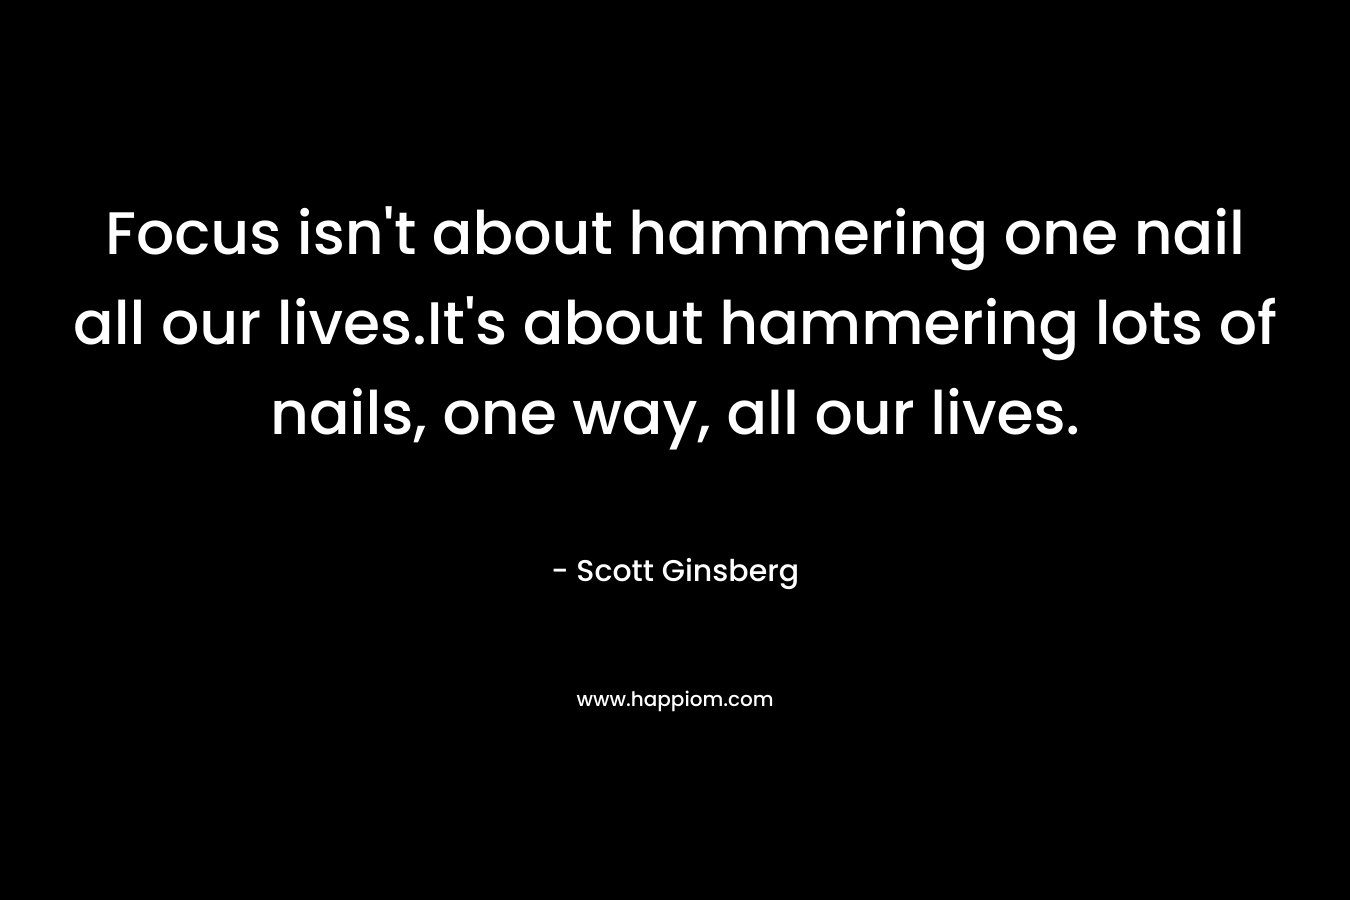 Focus isn't about hammering one nail all our lives.It's about hammering lots of nails, one way, all our lives.